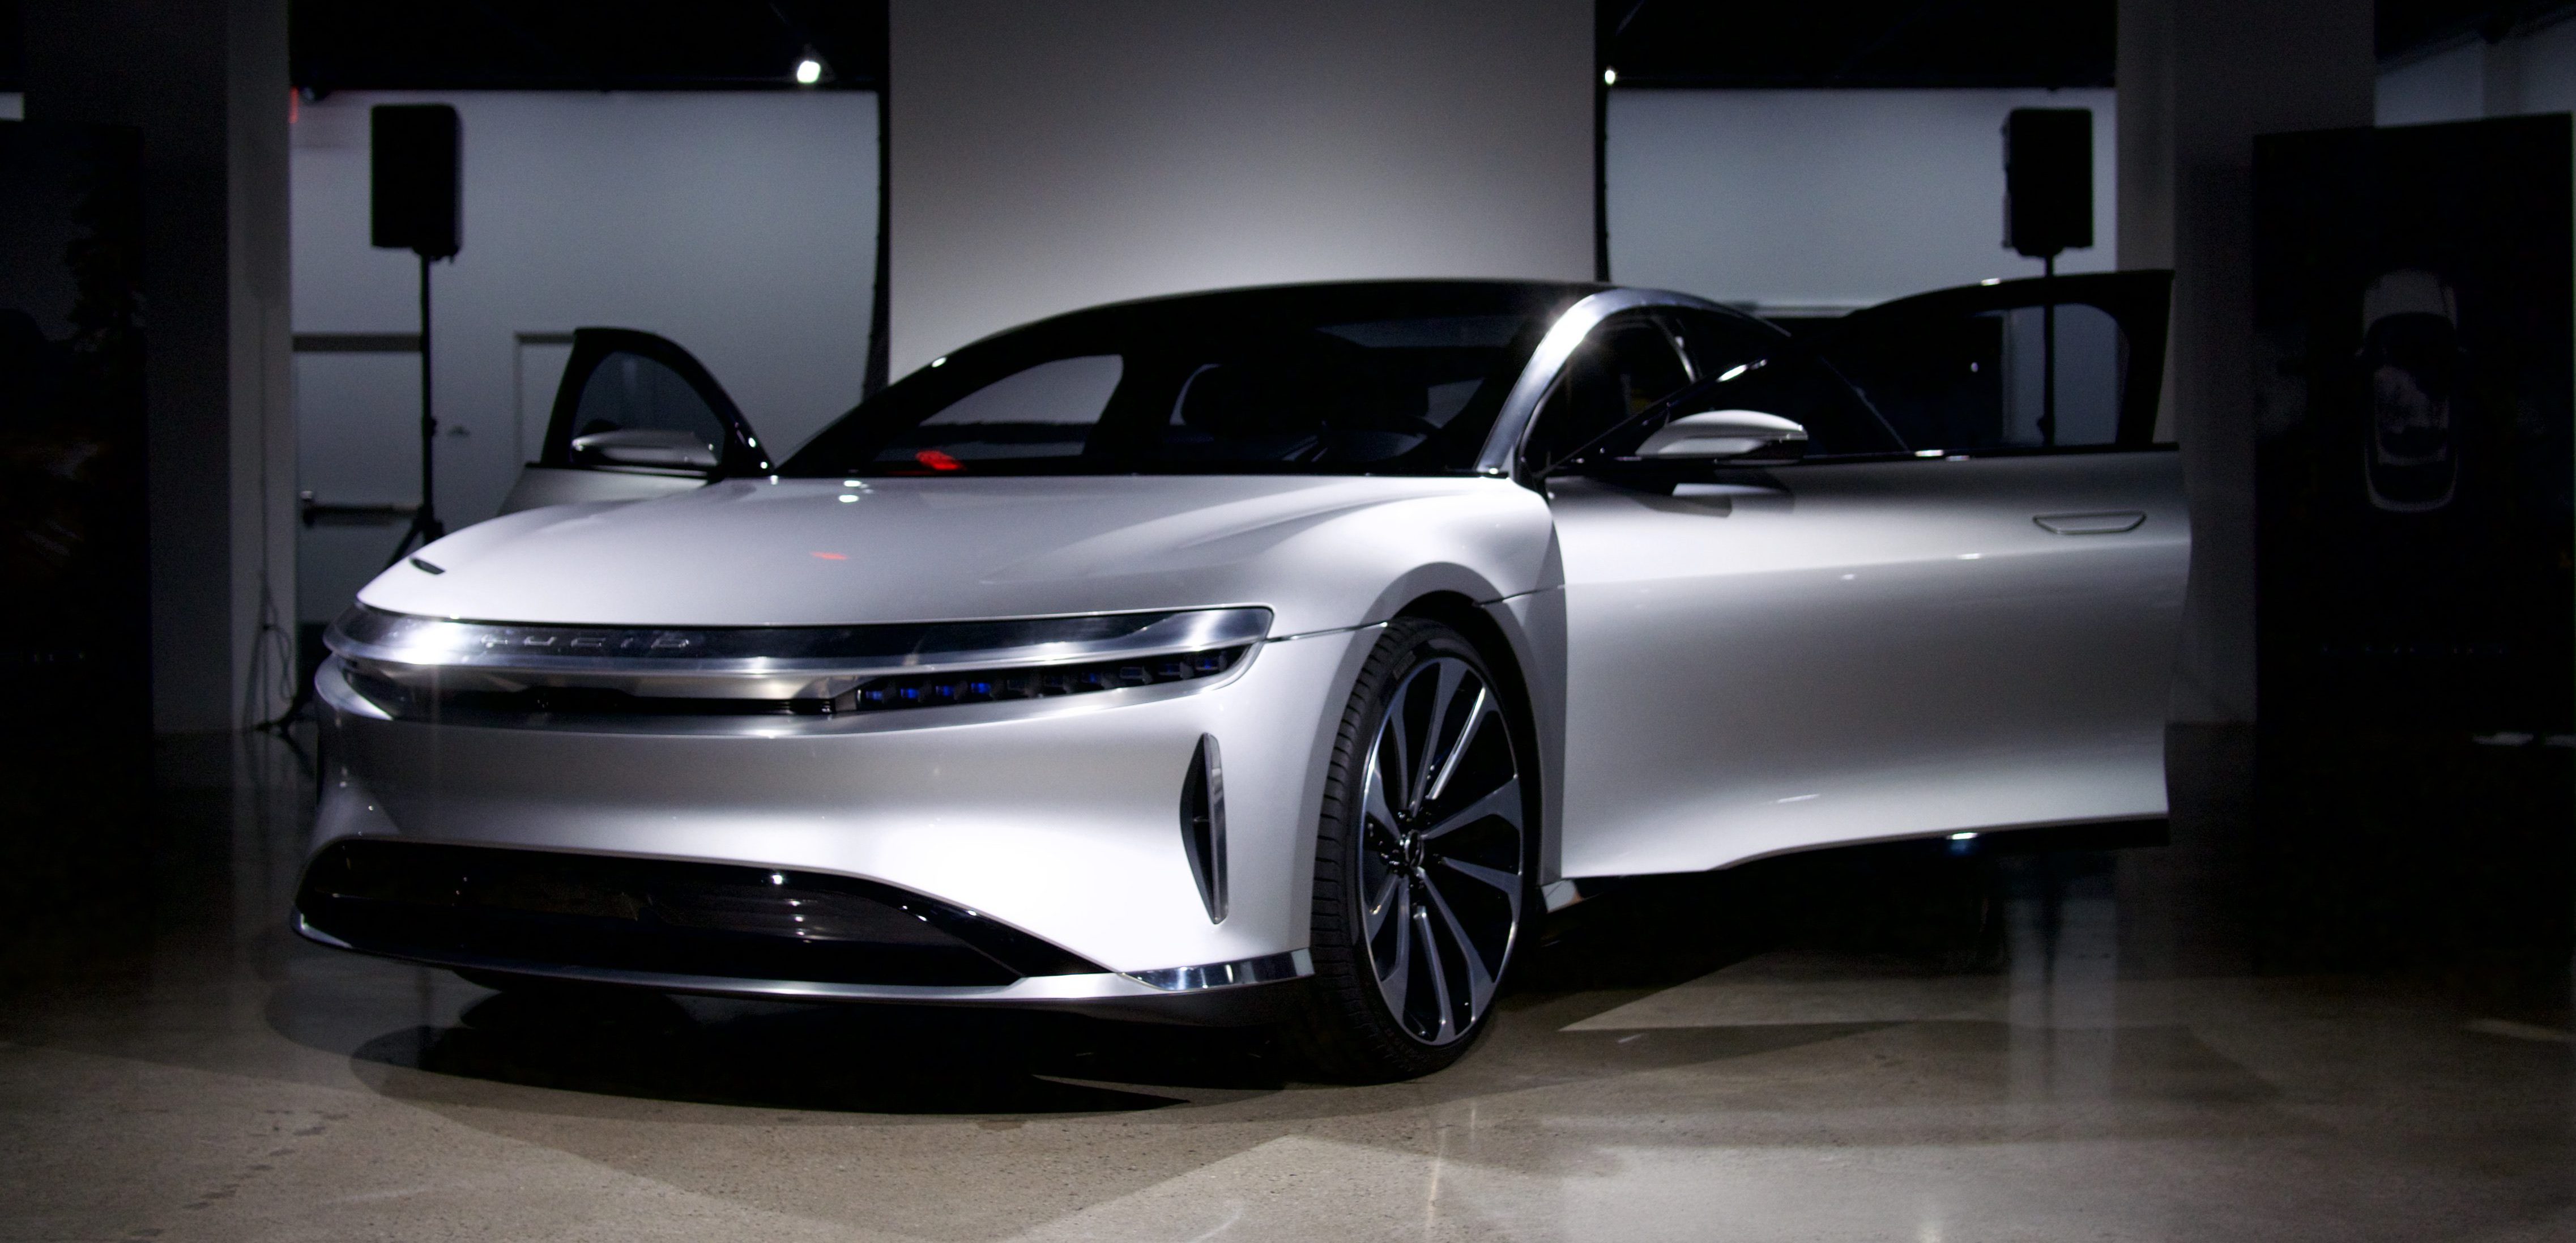 Lucid Motors announces aggressive 60,000 base price for its luxury all